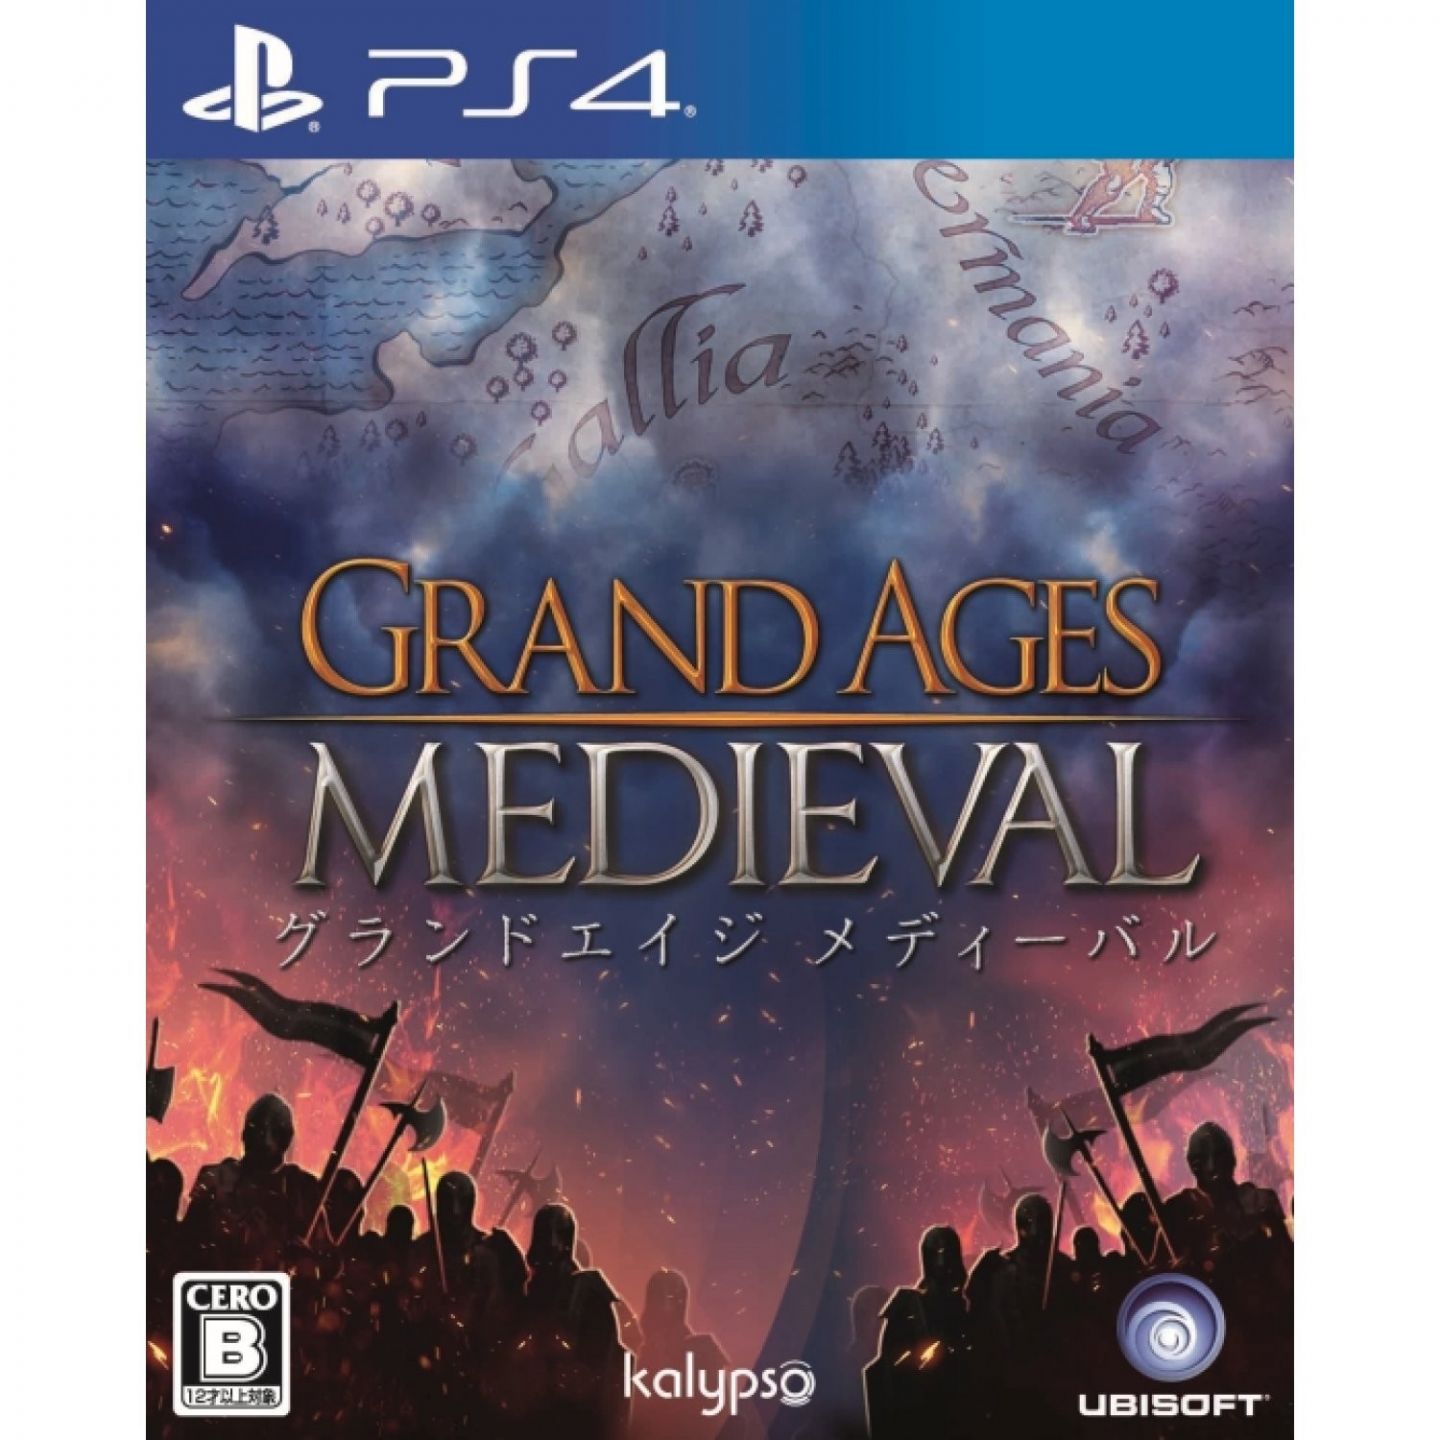 Medieval ps4. Grand ages Medieval ps4. Grand ages: Medieval. Grand ages.